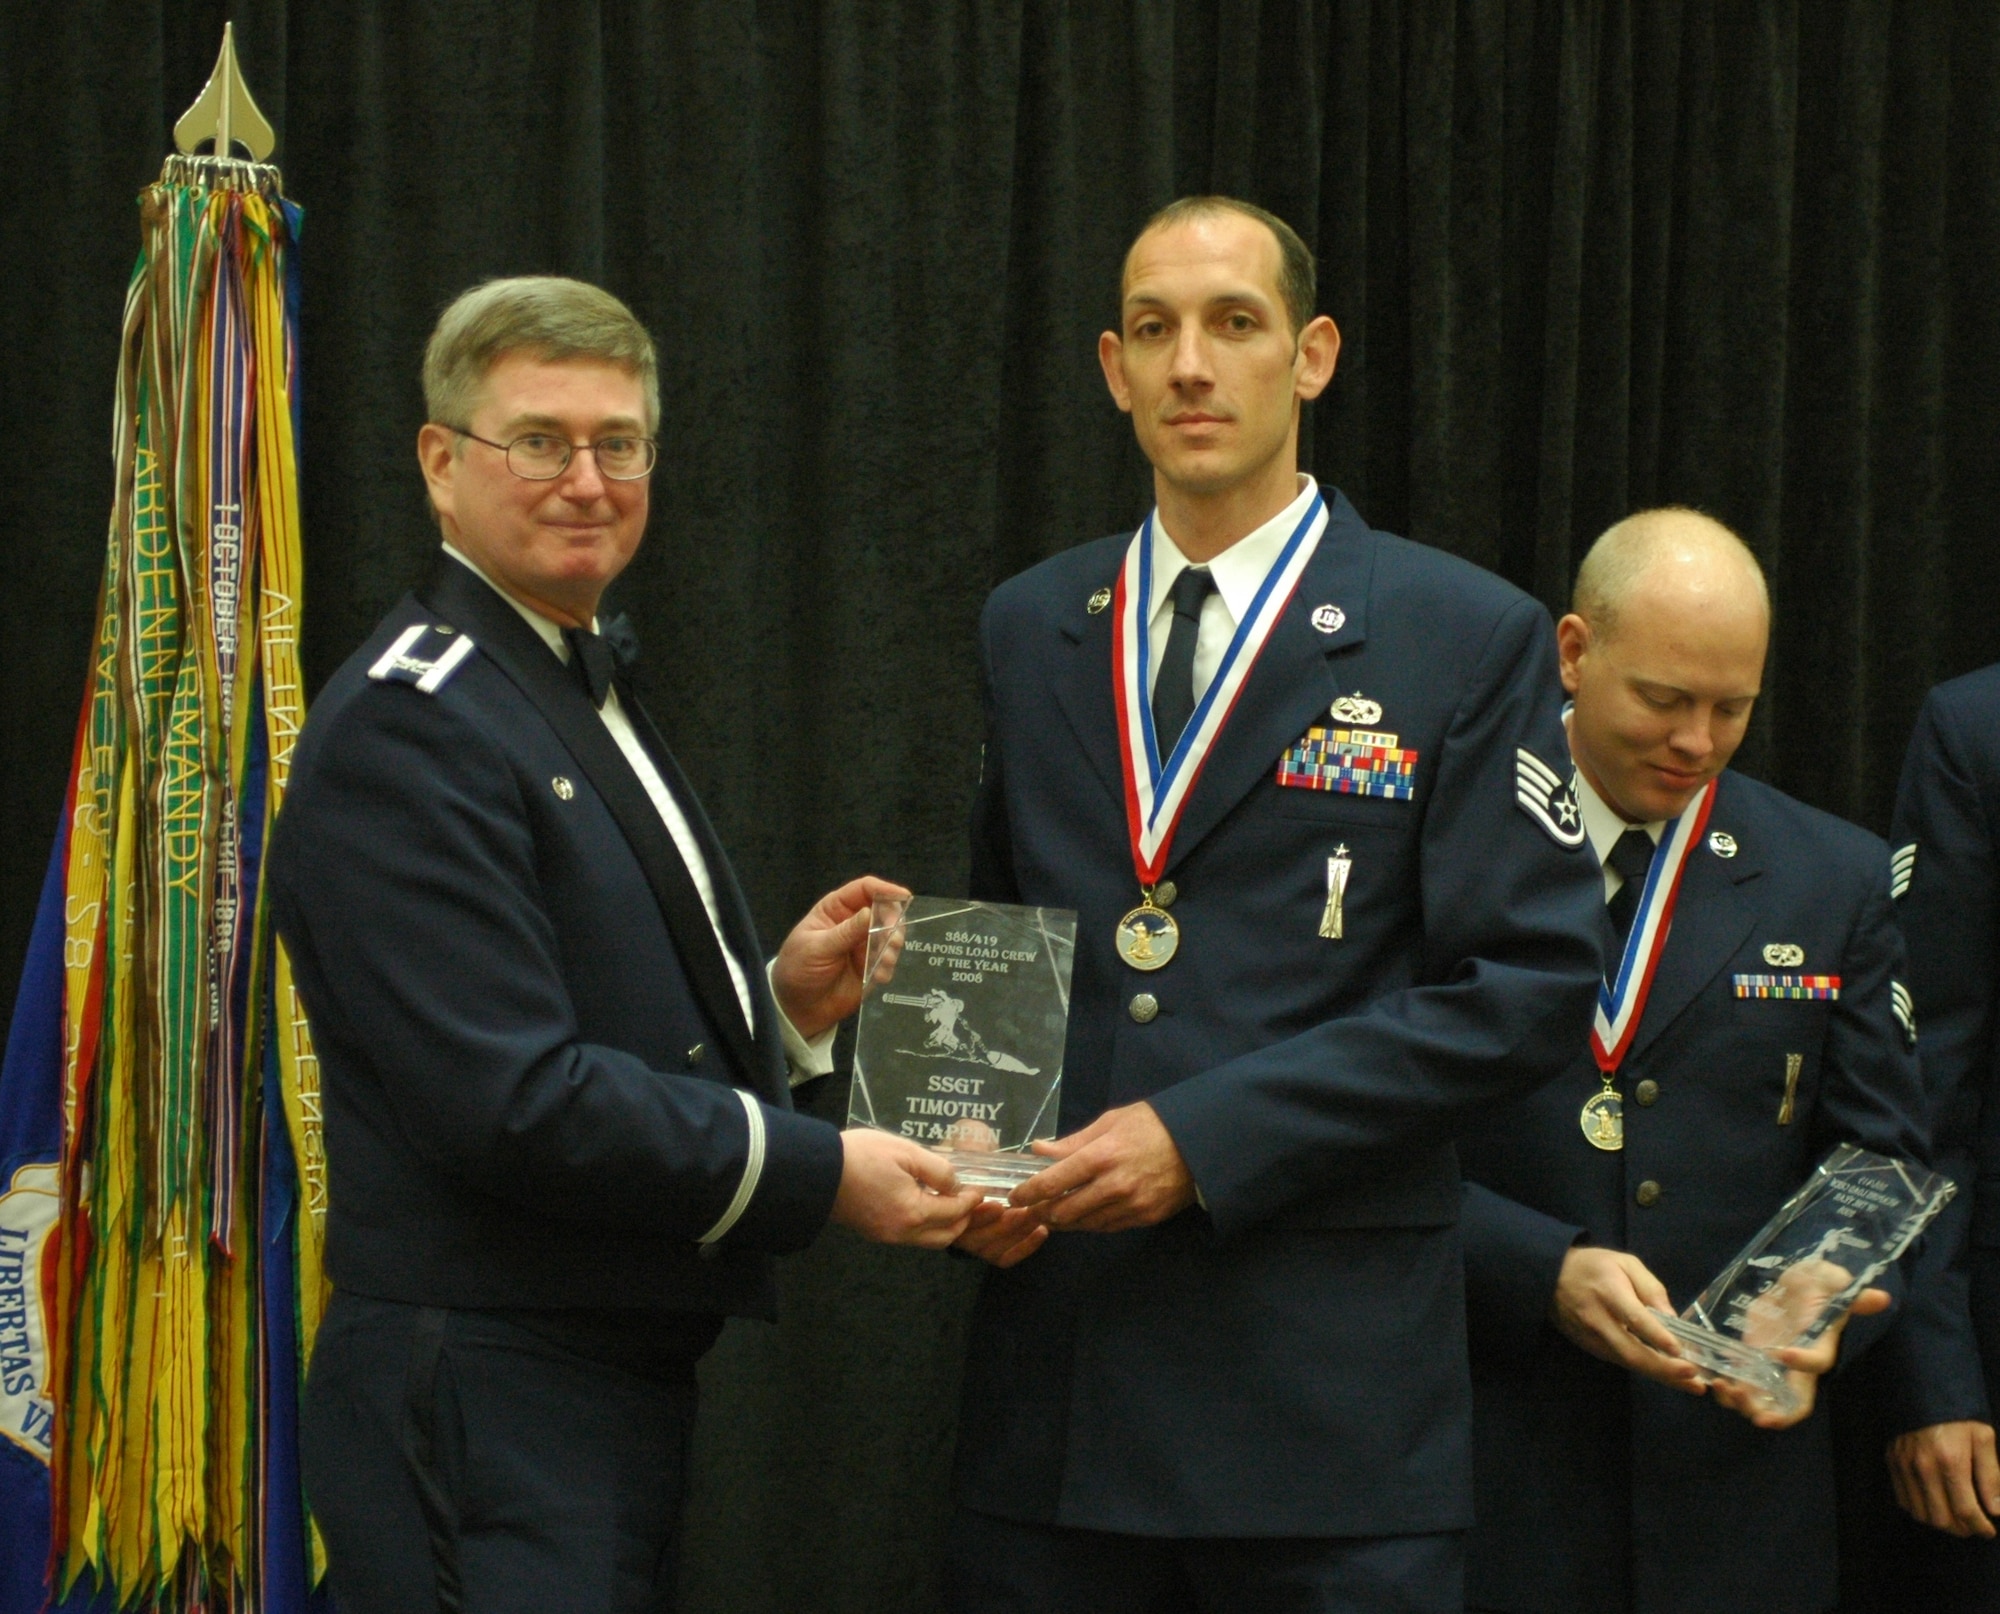 Staff Sgt. Timothy Stappen (right) of the 34th Aircraft Maintenance Unit is recognized by Col. Roger Rostvold, 388th Maintenance Group commander, at the Maintenance Professional of the Year banquet Oct. 4. Sergeant Stappen, Staff Sgt. Ronald Thomas and Airman 1st Class Michael Long made up the winning team in the Load Crew of the Year competition held Sep. 19. (Photo by Master Sgt. Ted Robinson)  